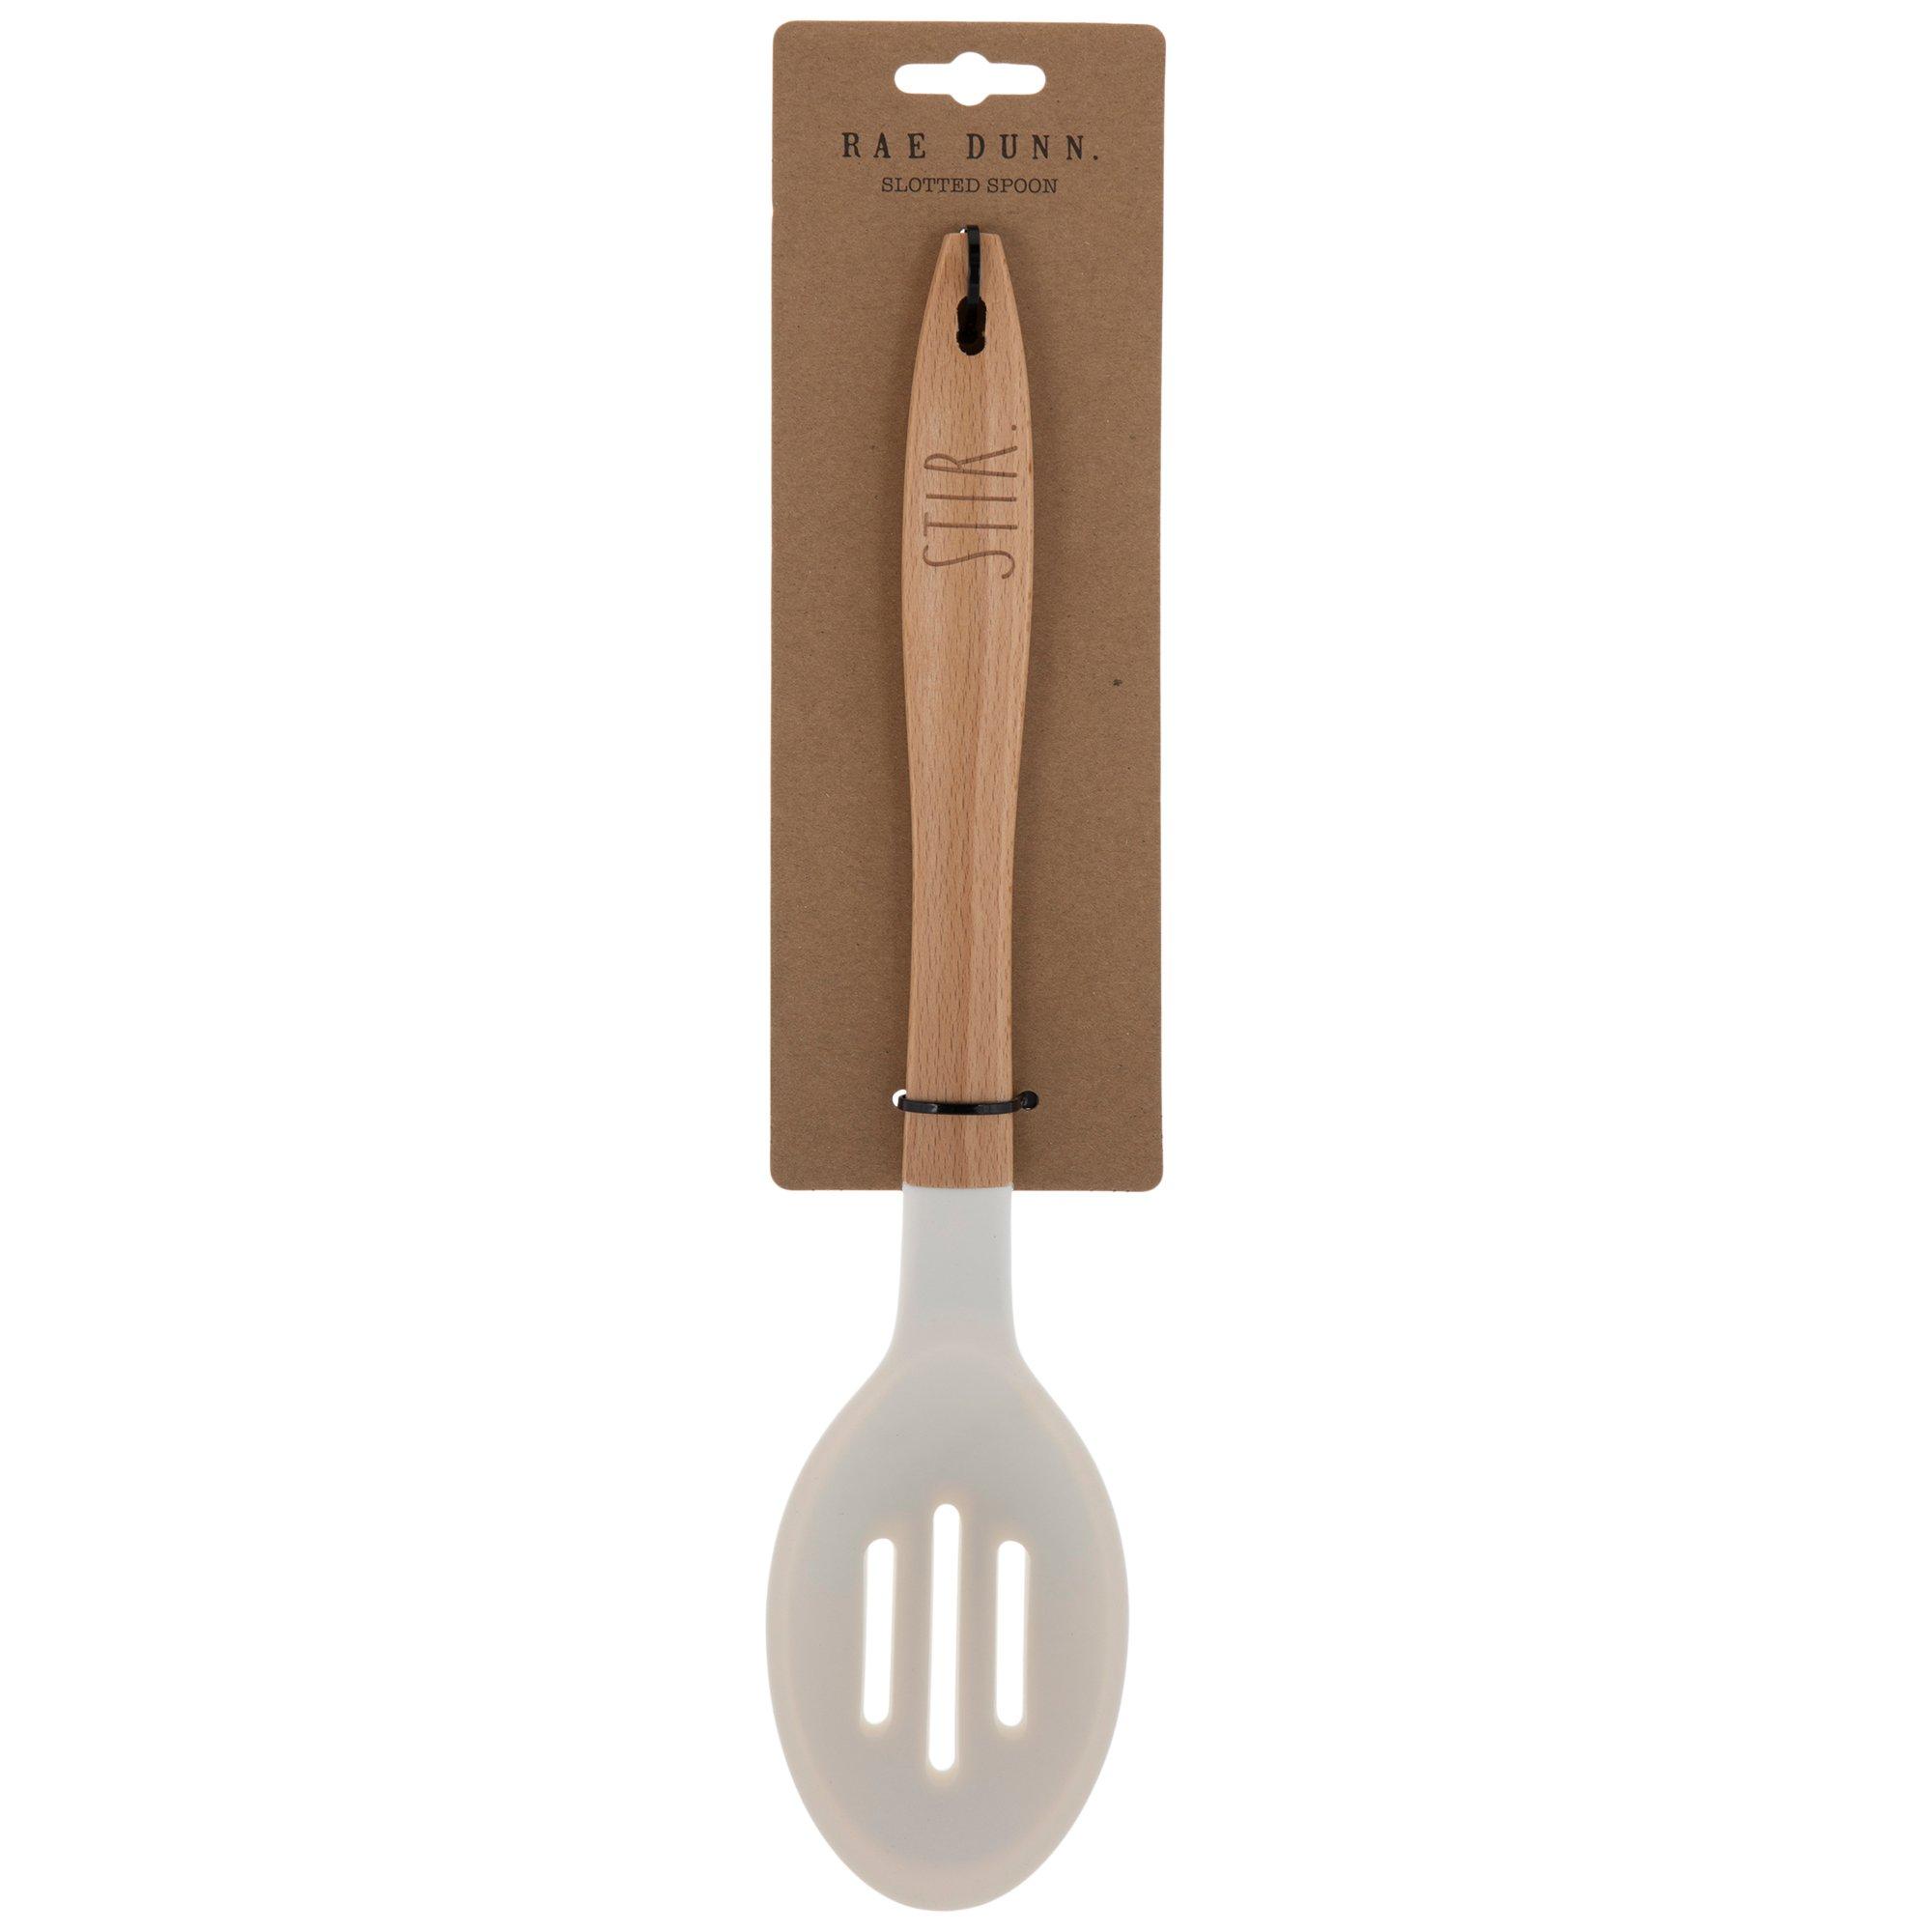 Crofton Chef Collection Slotted Spoon : White – Aussie2My